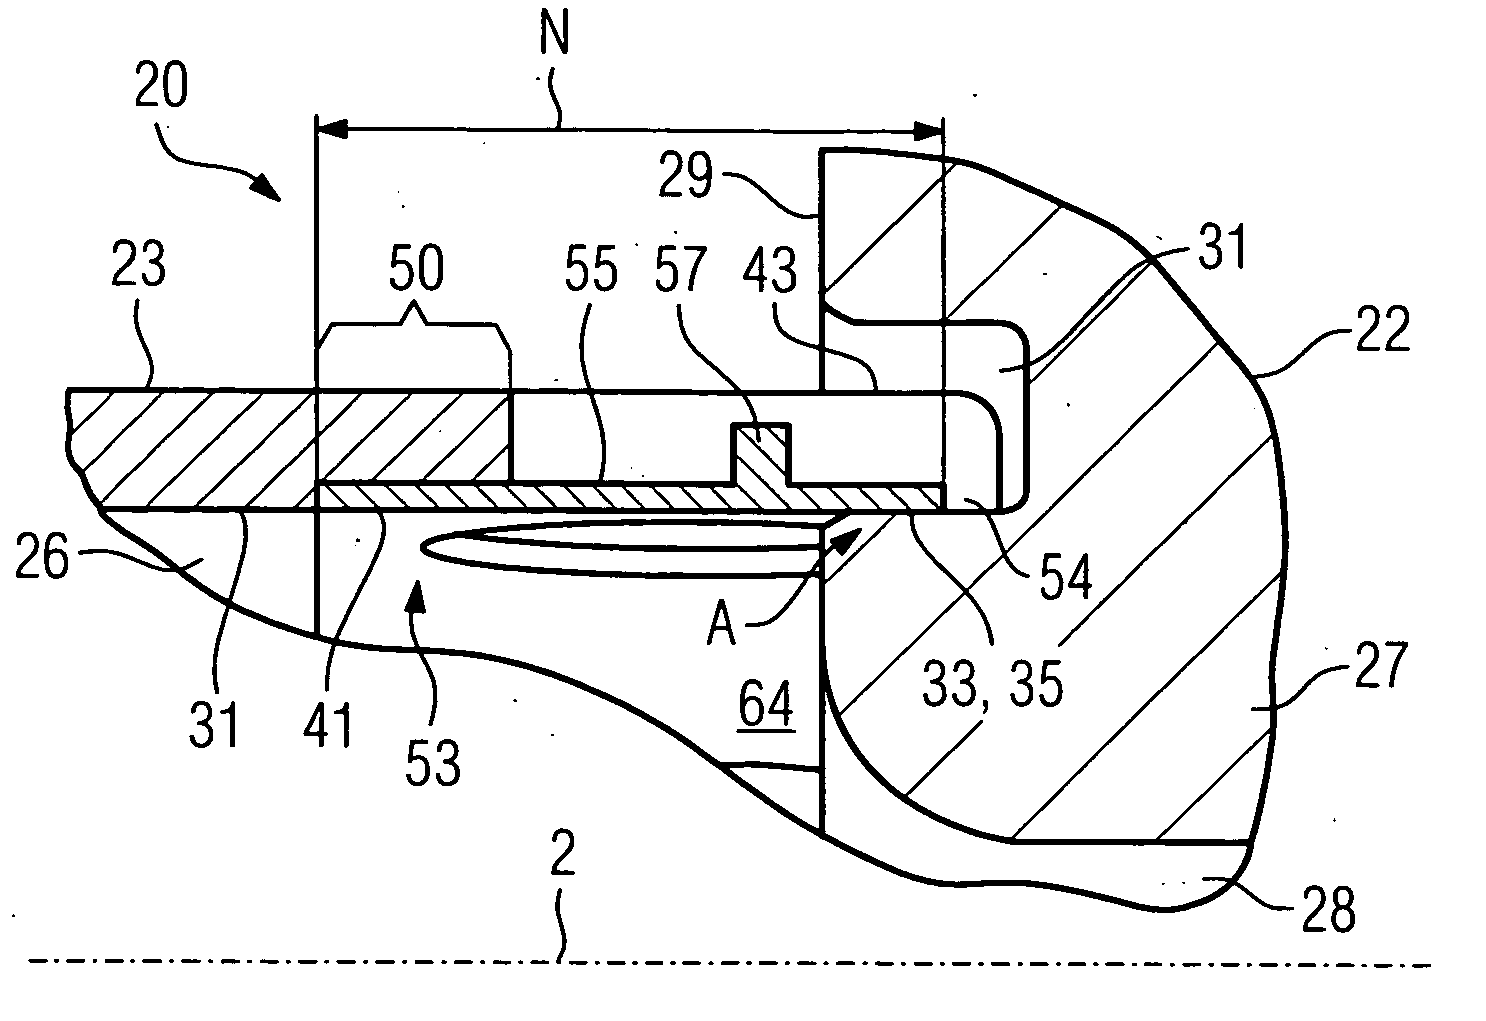 Fastening arrangement of a pipe on a circumferential surface